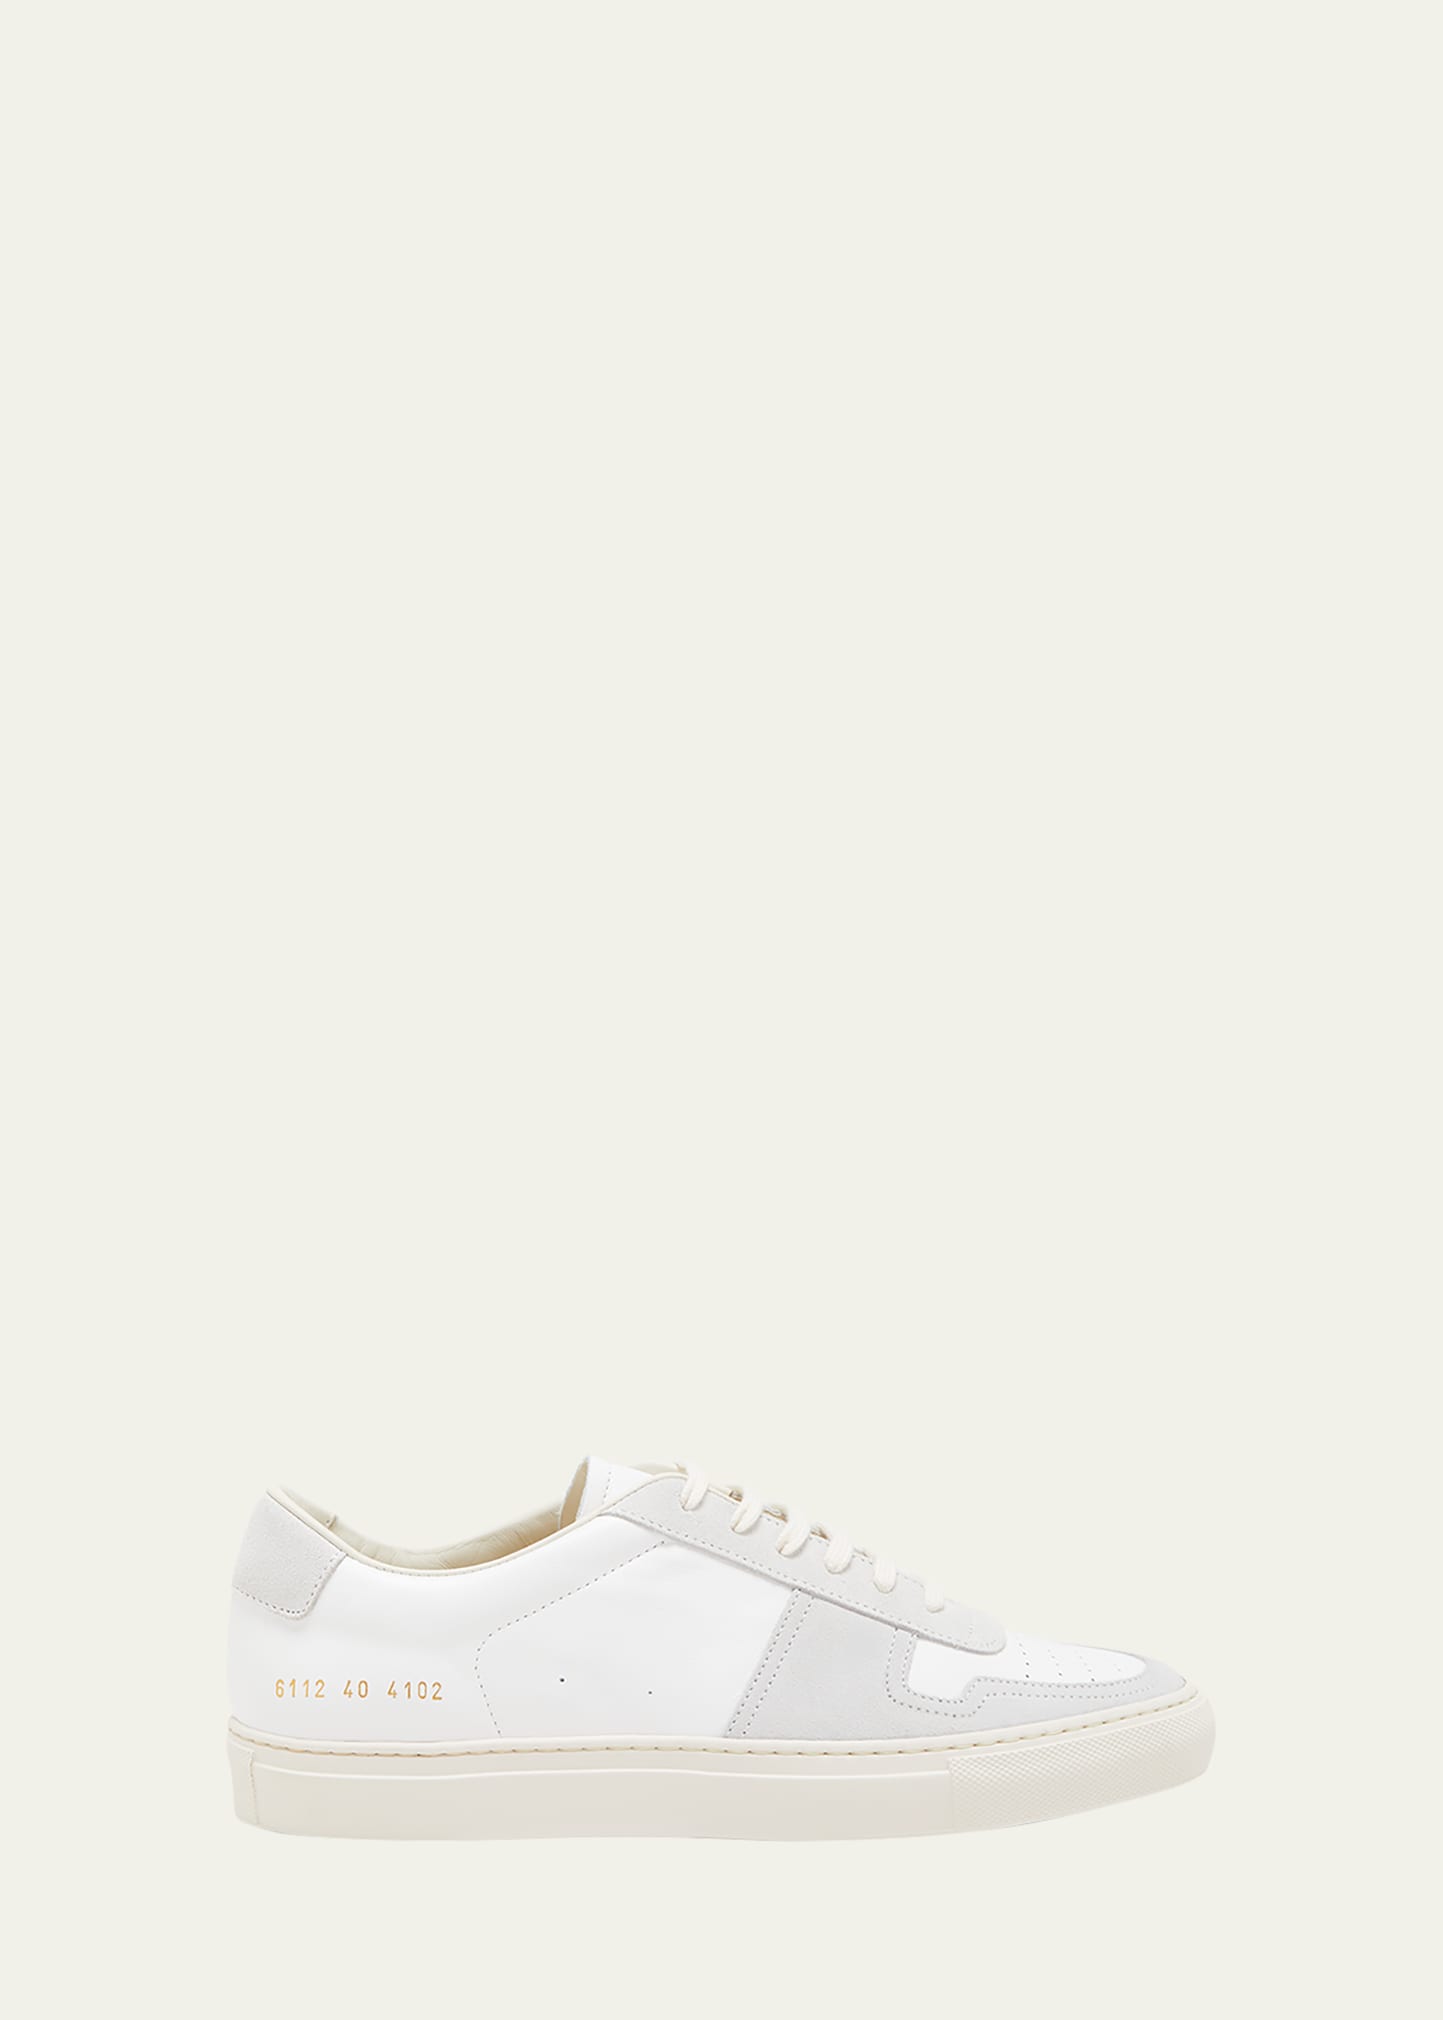 COMMON PROJECTS BBALL SUMMER MIXED LEATHER COURT SNEAKERS